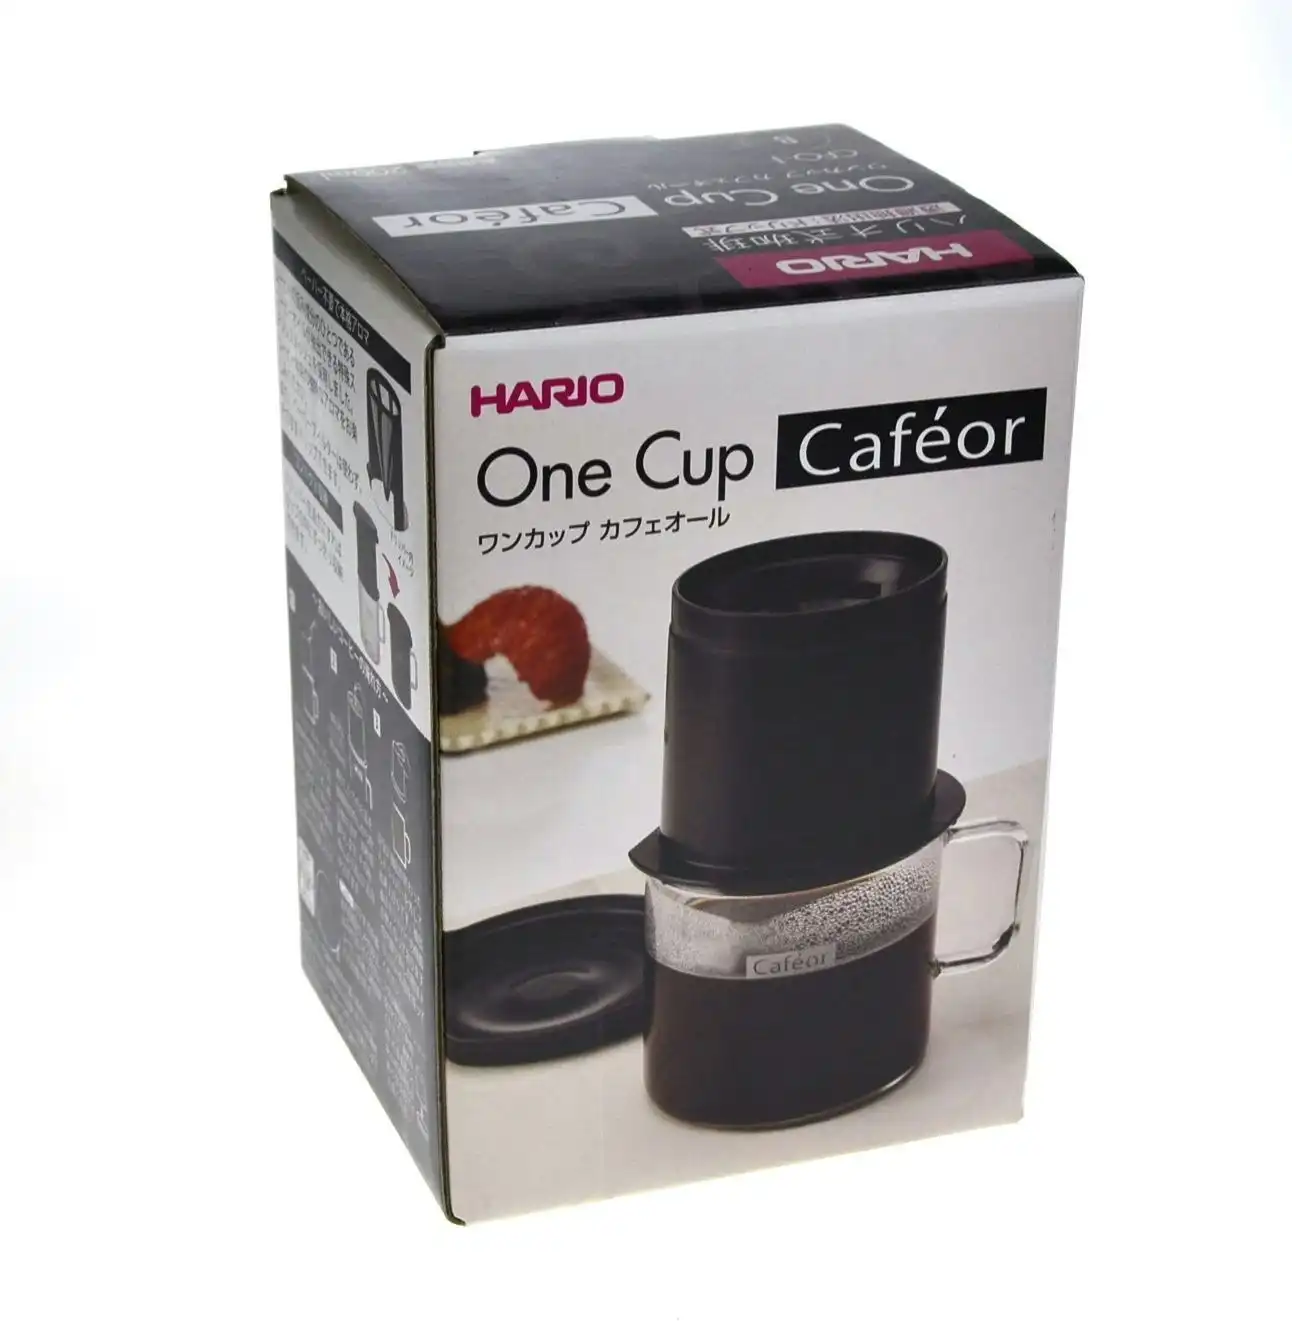 Hario One Cup Cafeor Dripper